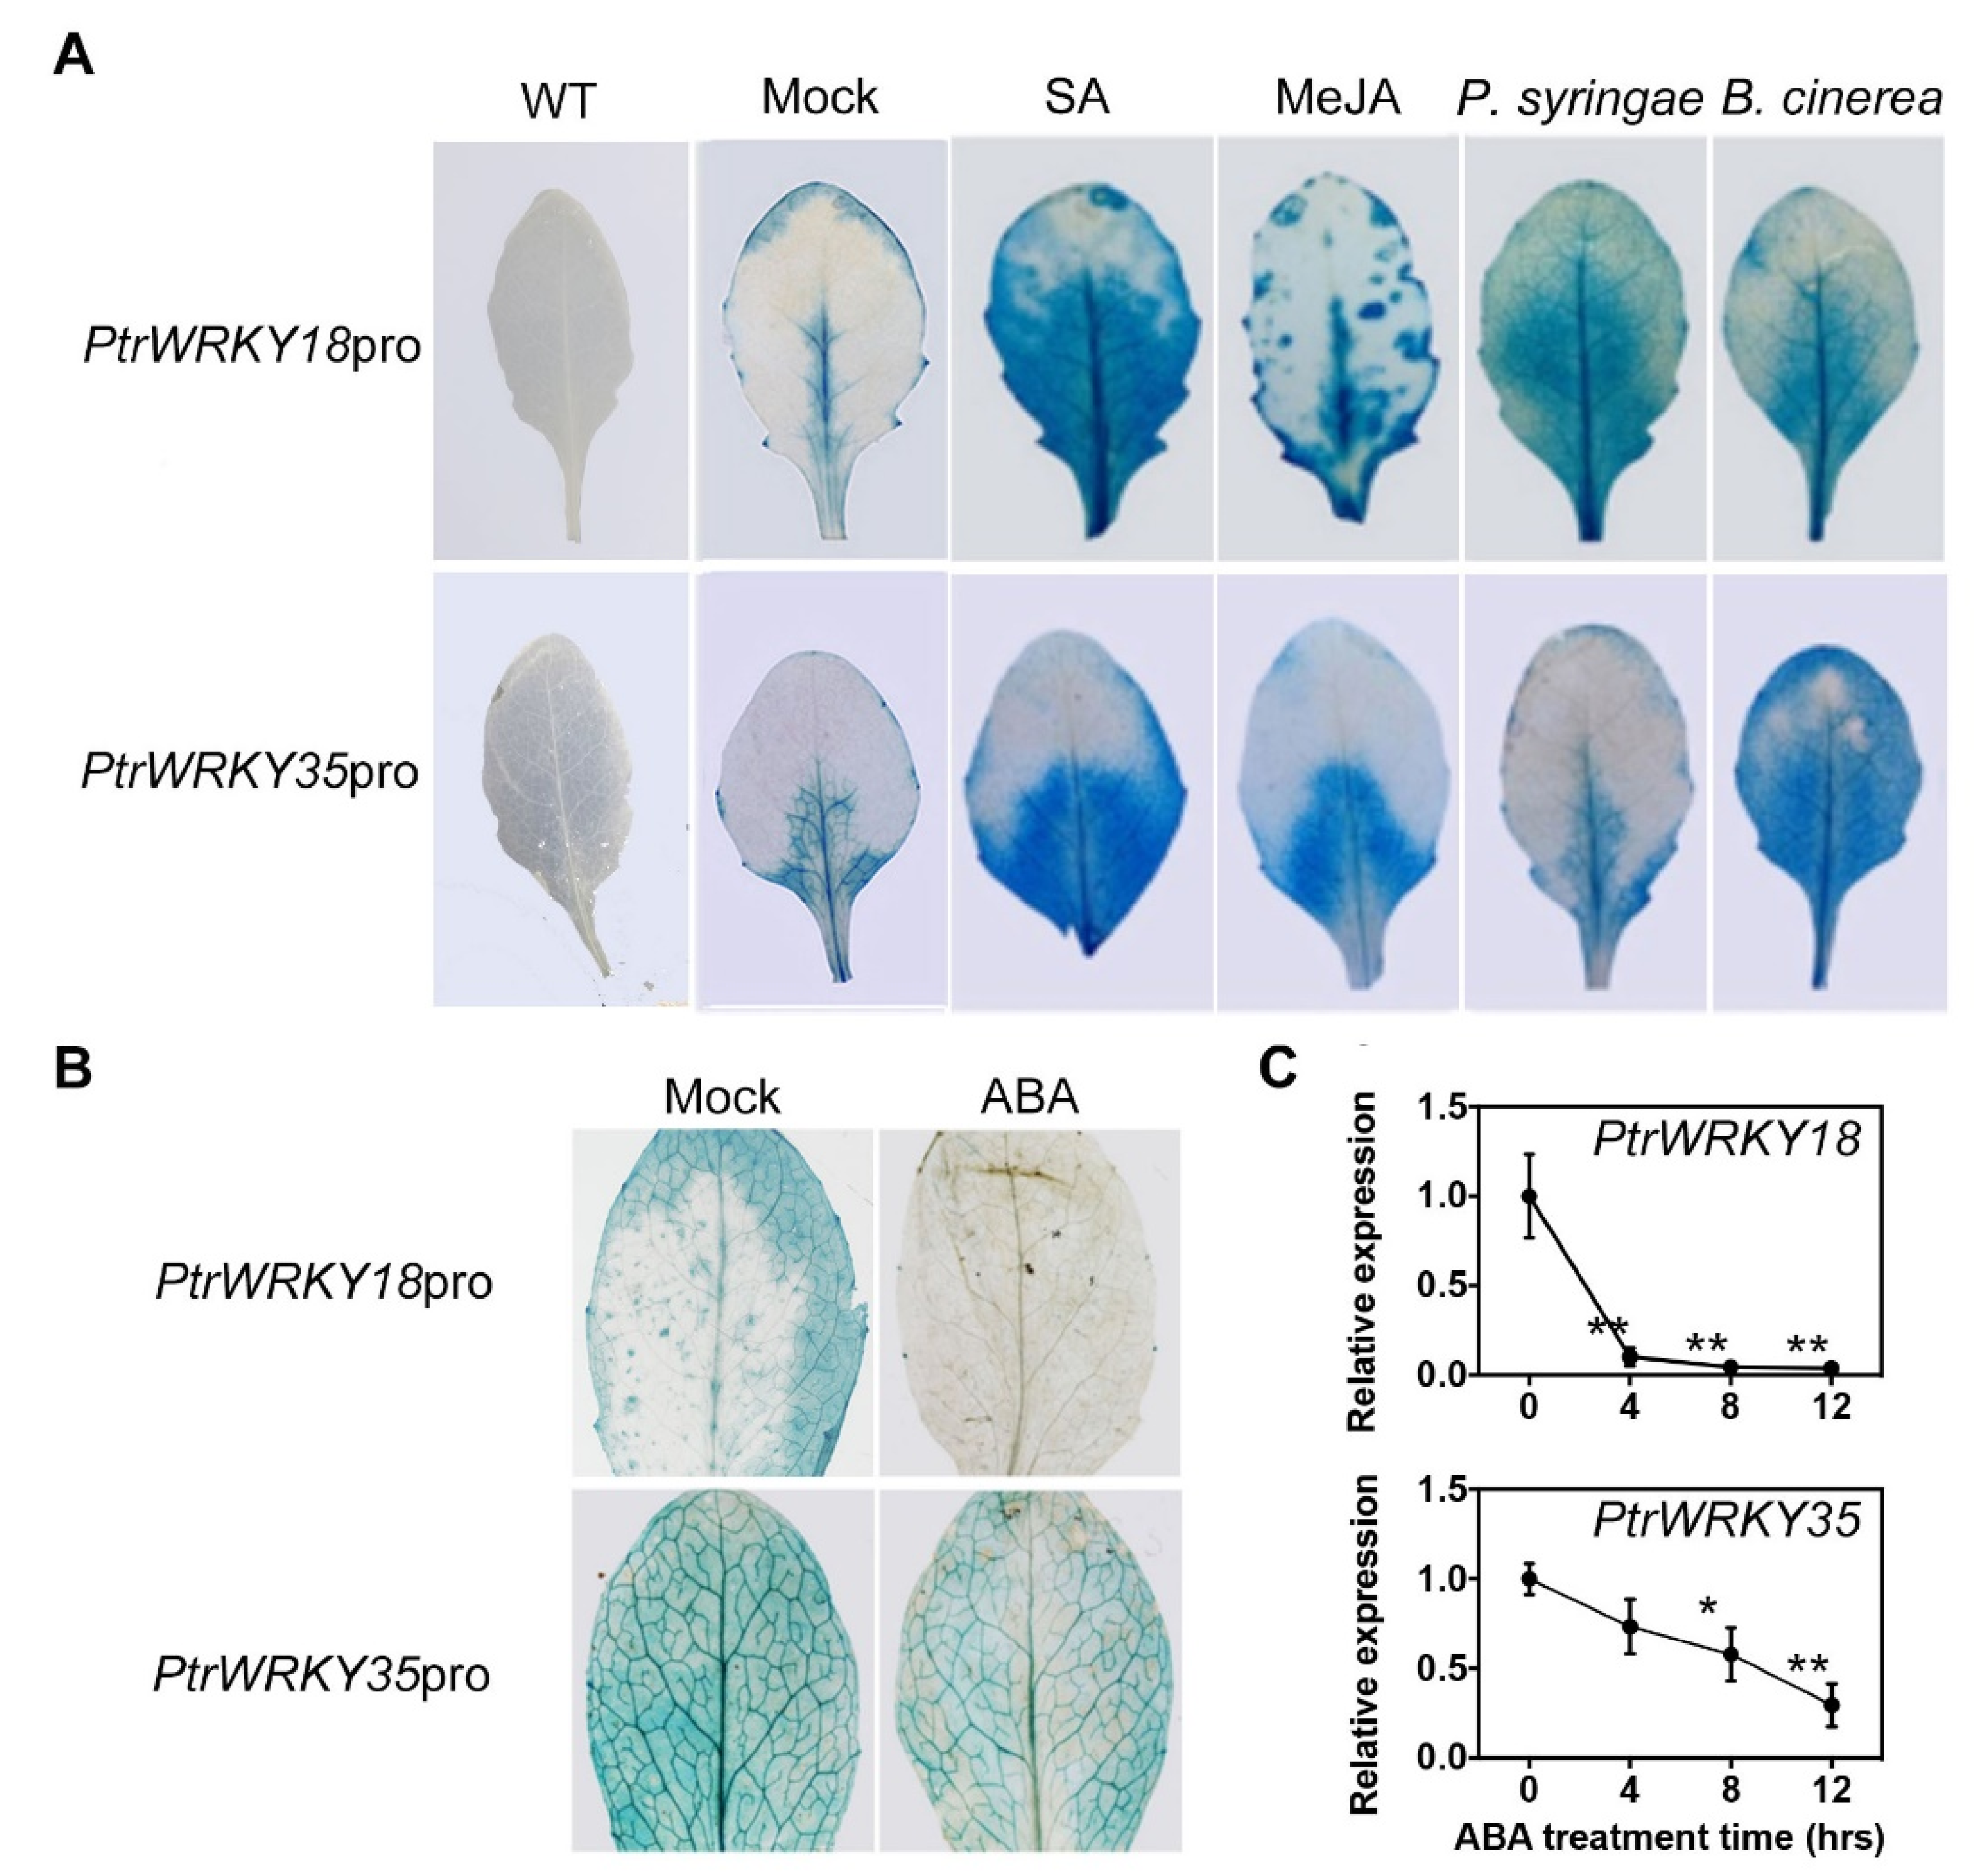 IJMS | Free Full-Text | Heterologous Expression of Poplar WRKY18/35  Paralogs in Arabidopsis Reveals Their Antagonistic Regulation on Pathogen  Resistance and Abiotic Stress Tolerance via Variable Hormonal Pathways